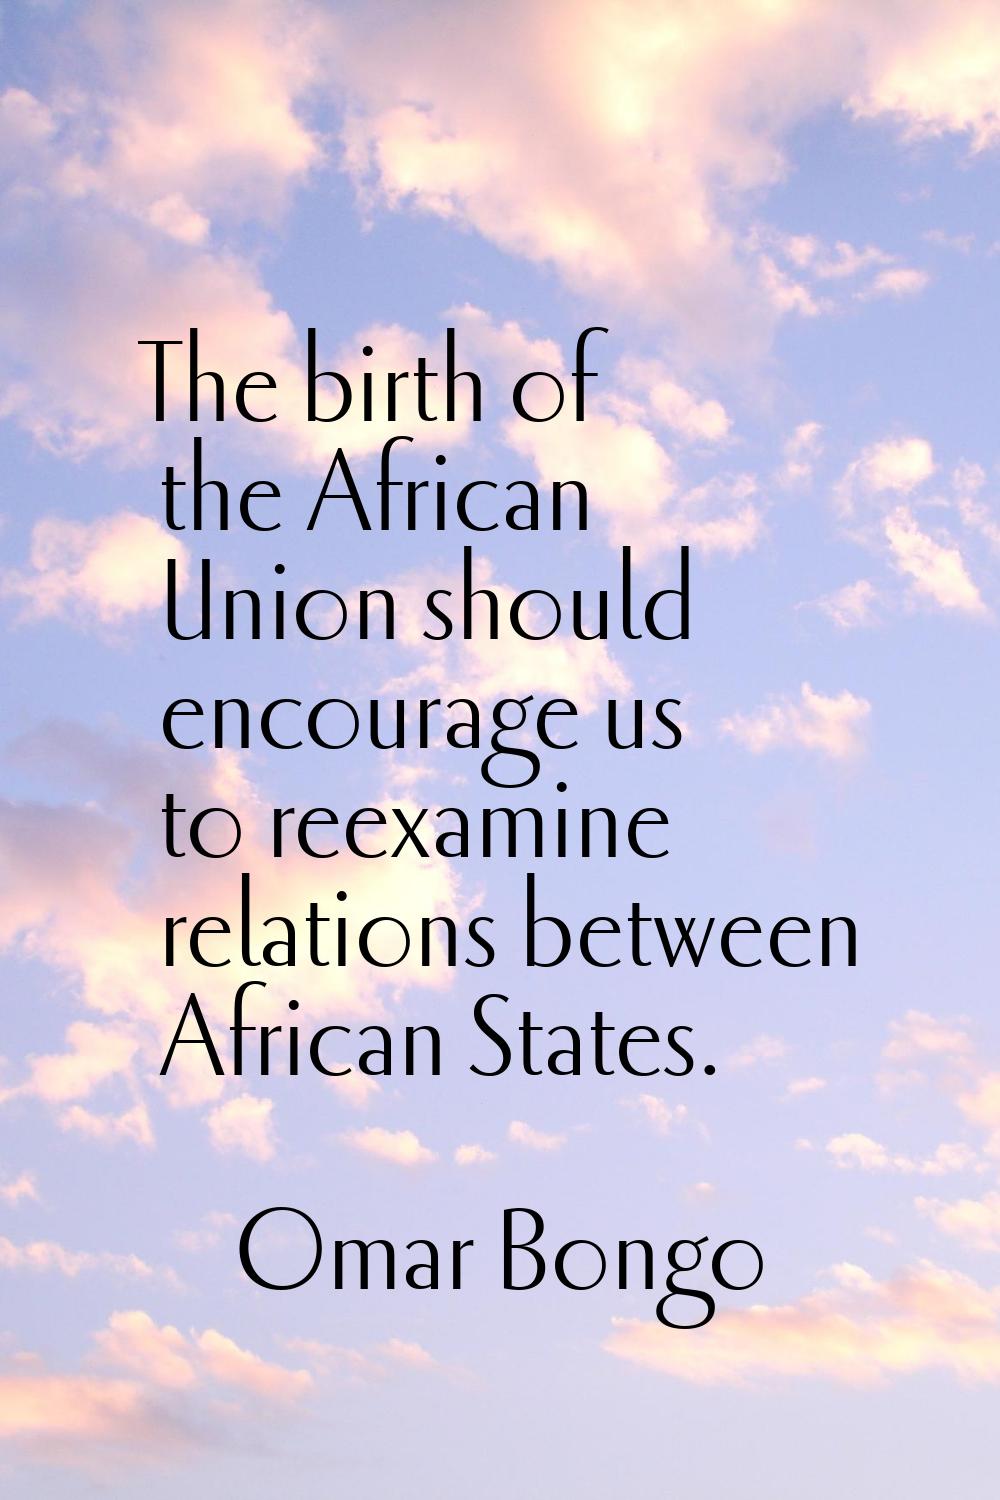 The birth of the African Union should encourage us to reexamine relations between African States.